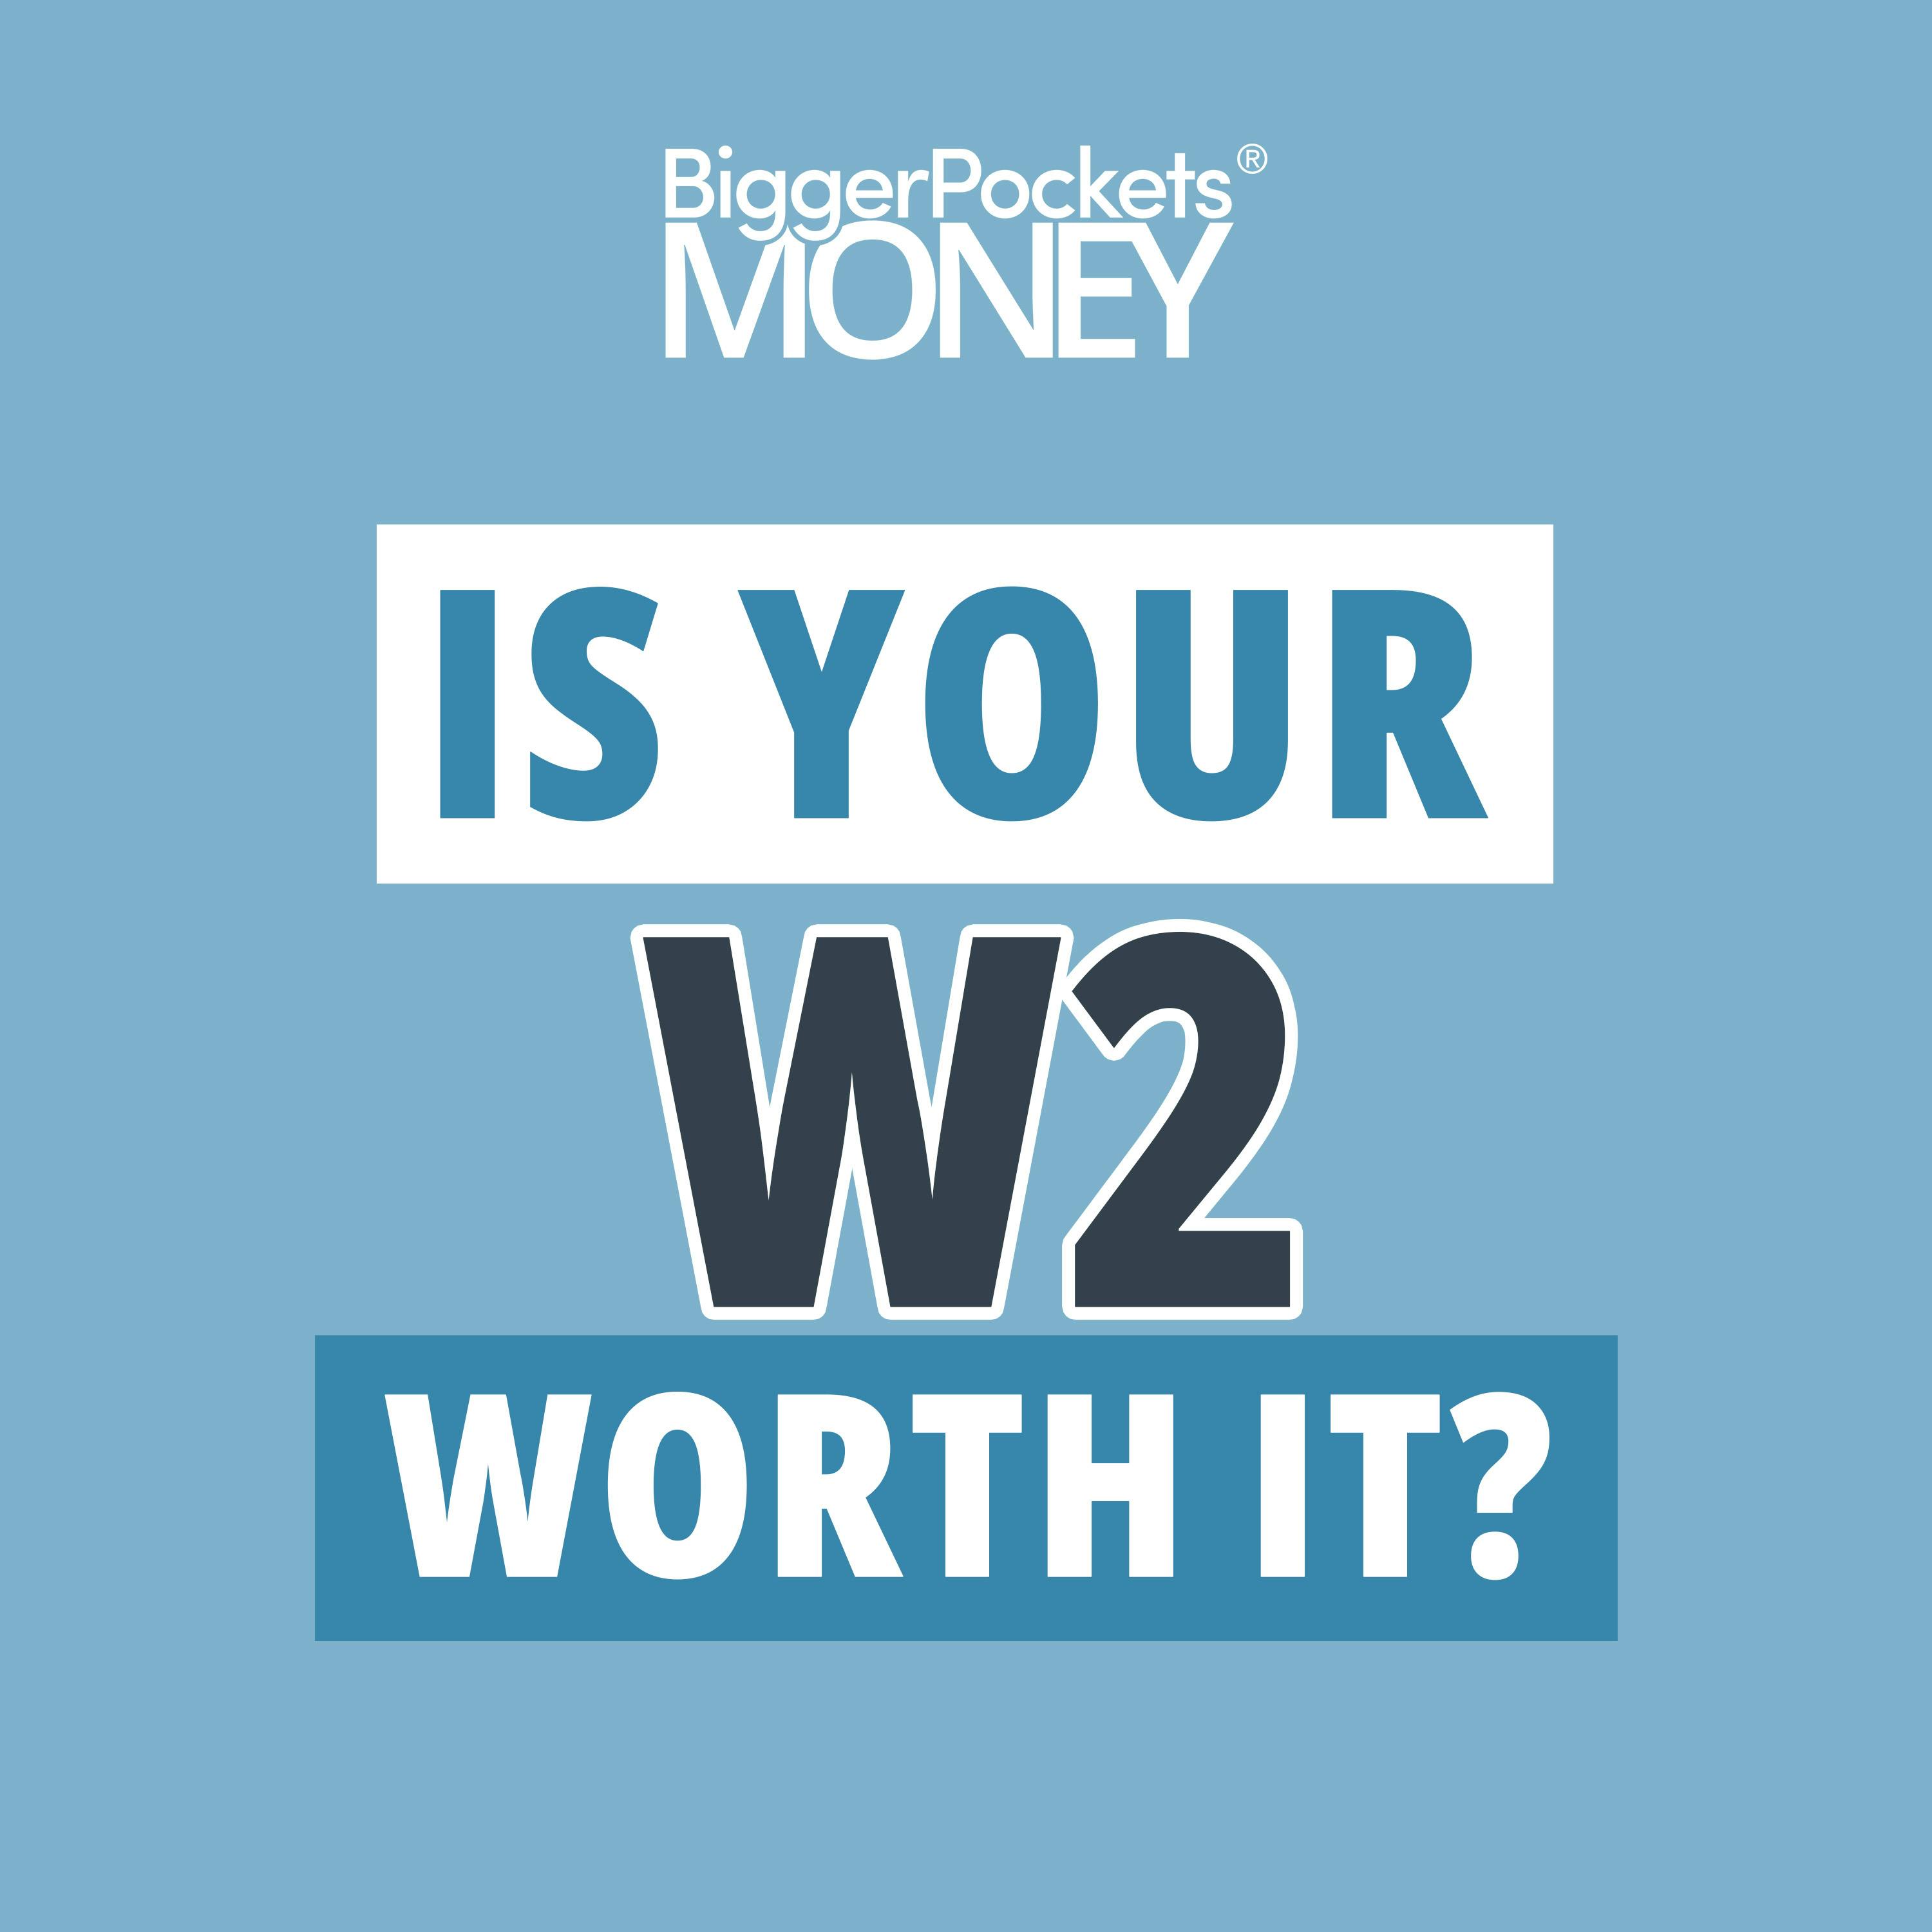 423: Burned Out? How to Quit Your W2 Job and Still Achieve FIRE